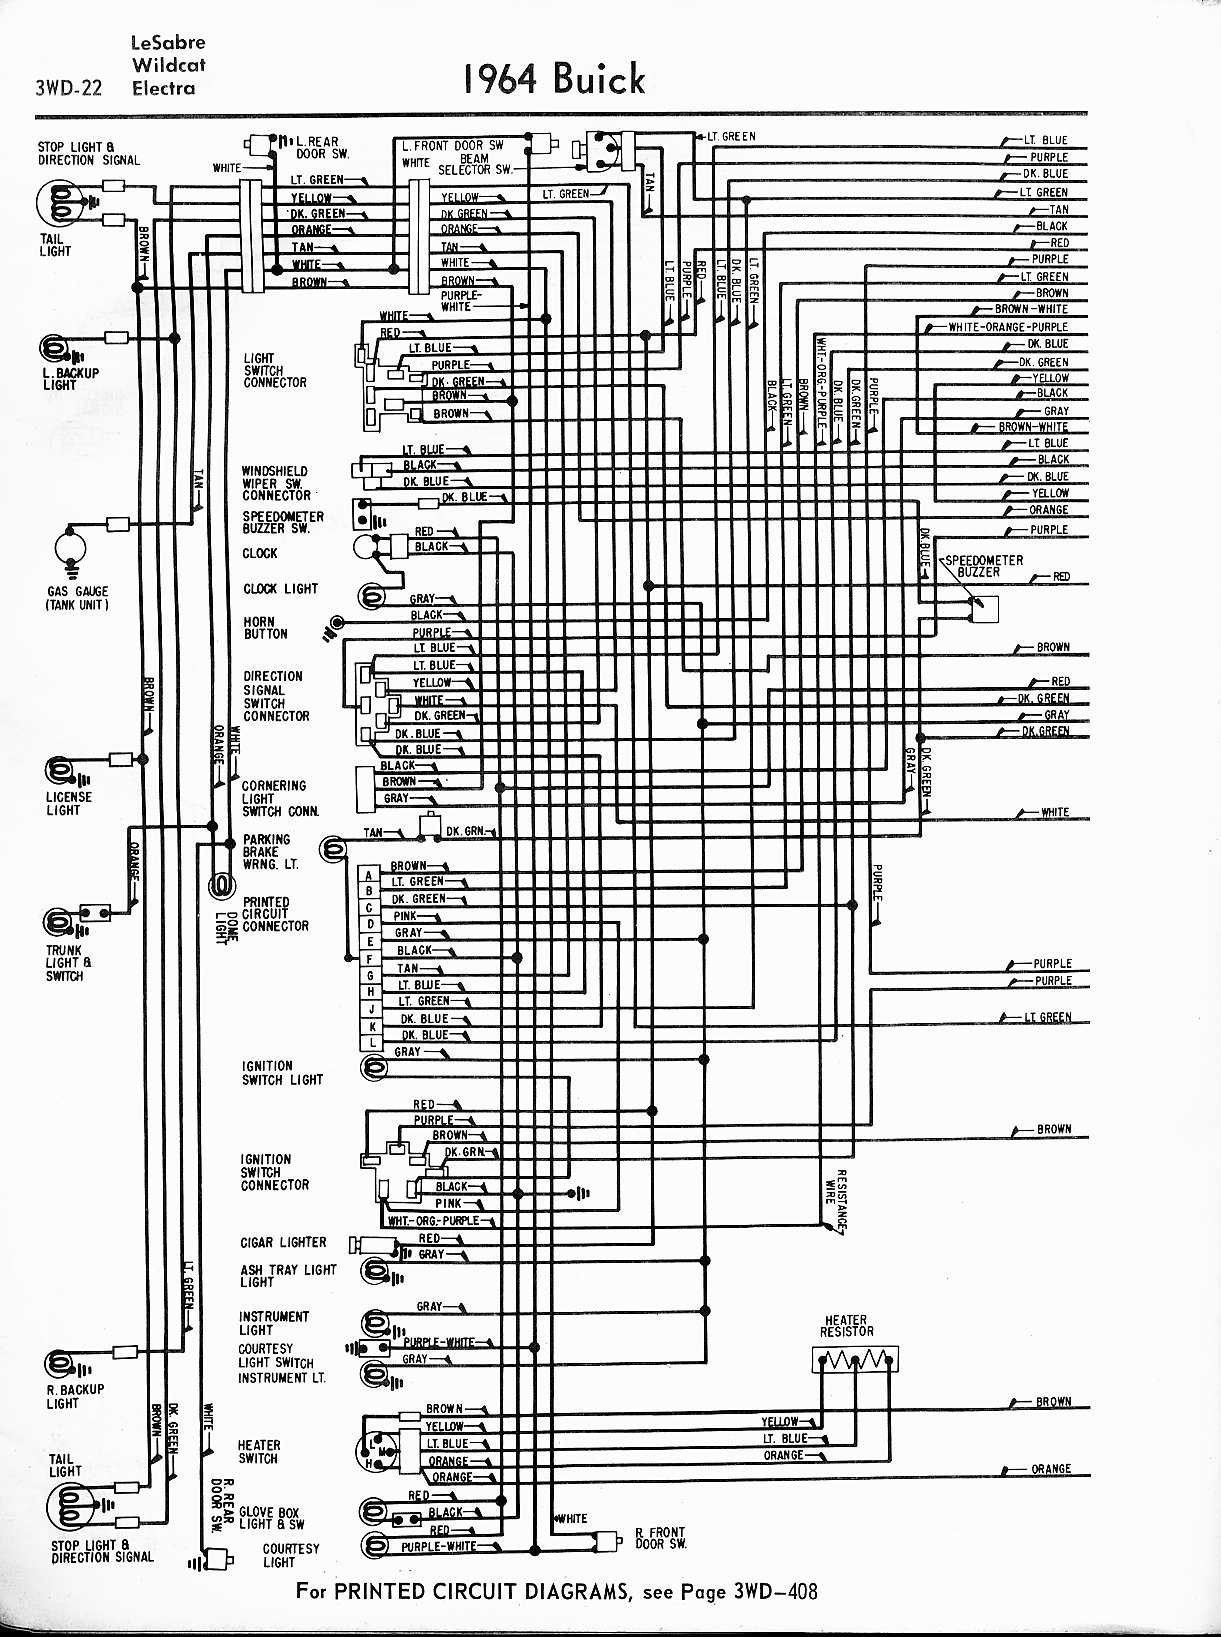 2000 buick lesabre wiring diagram 1993 buick roadmaster wiring diagram 1993 free engine image for user of 2000 buick lesabre wiring diagram